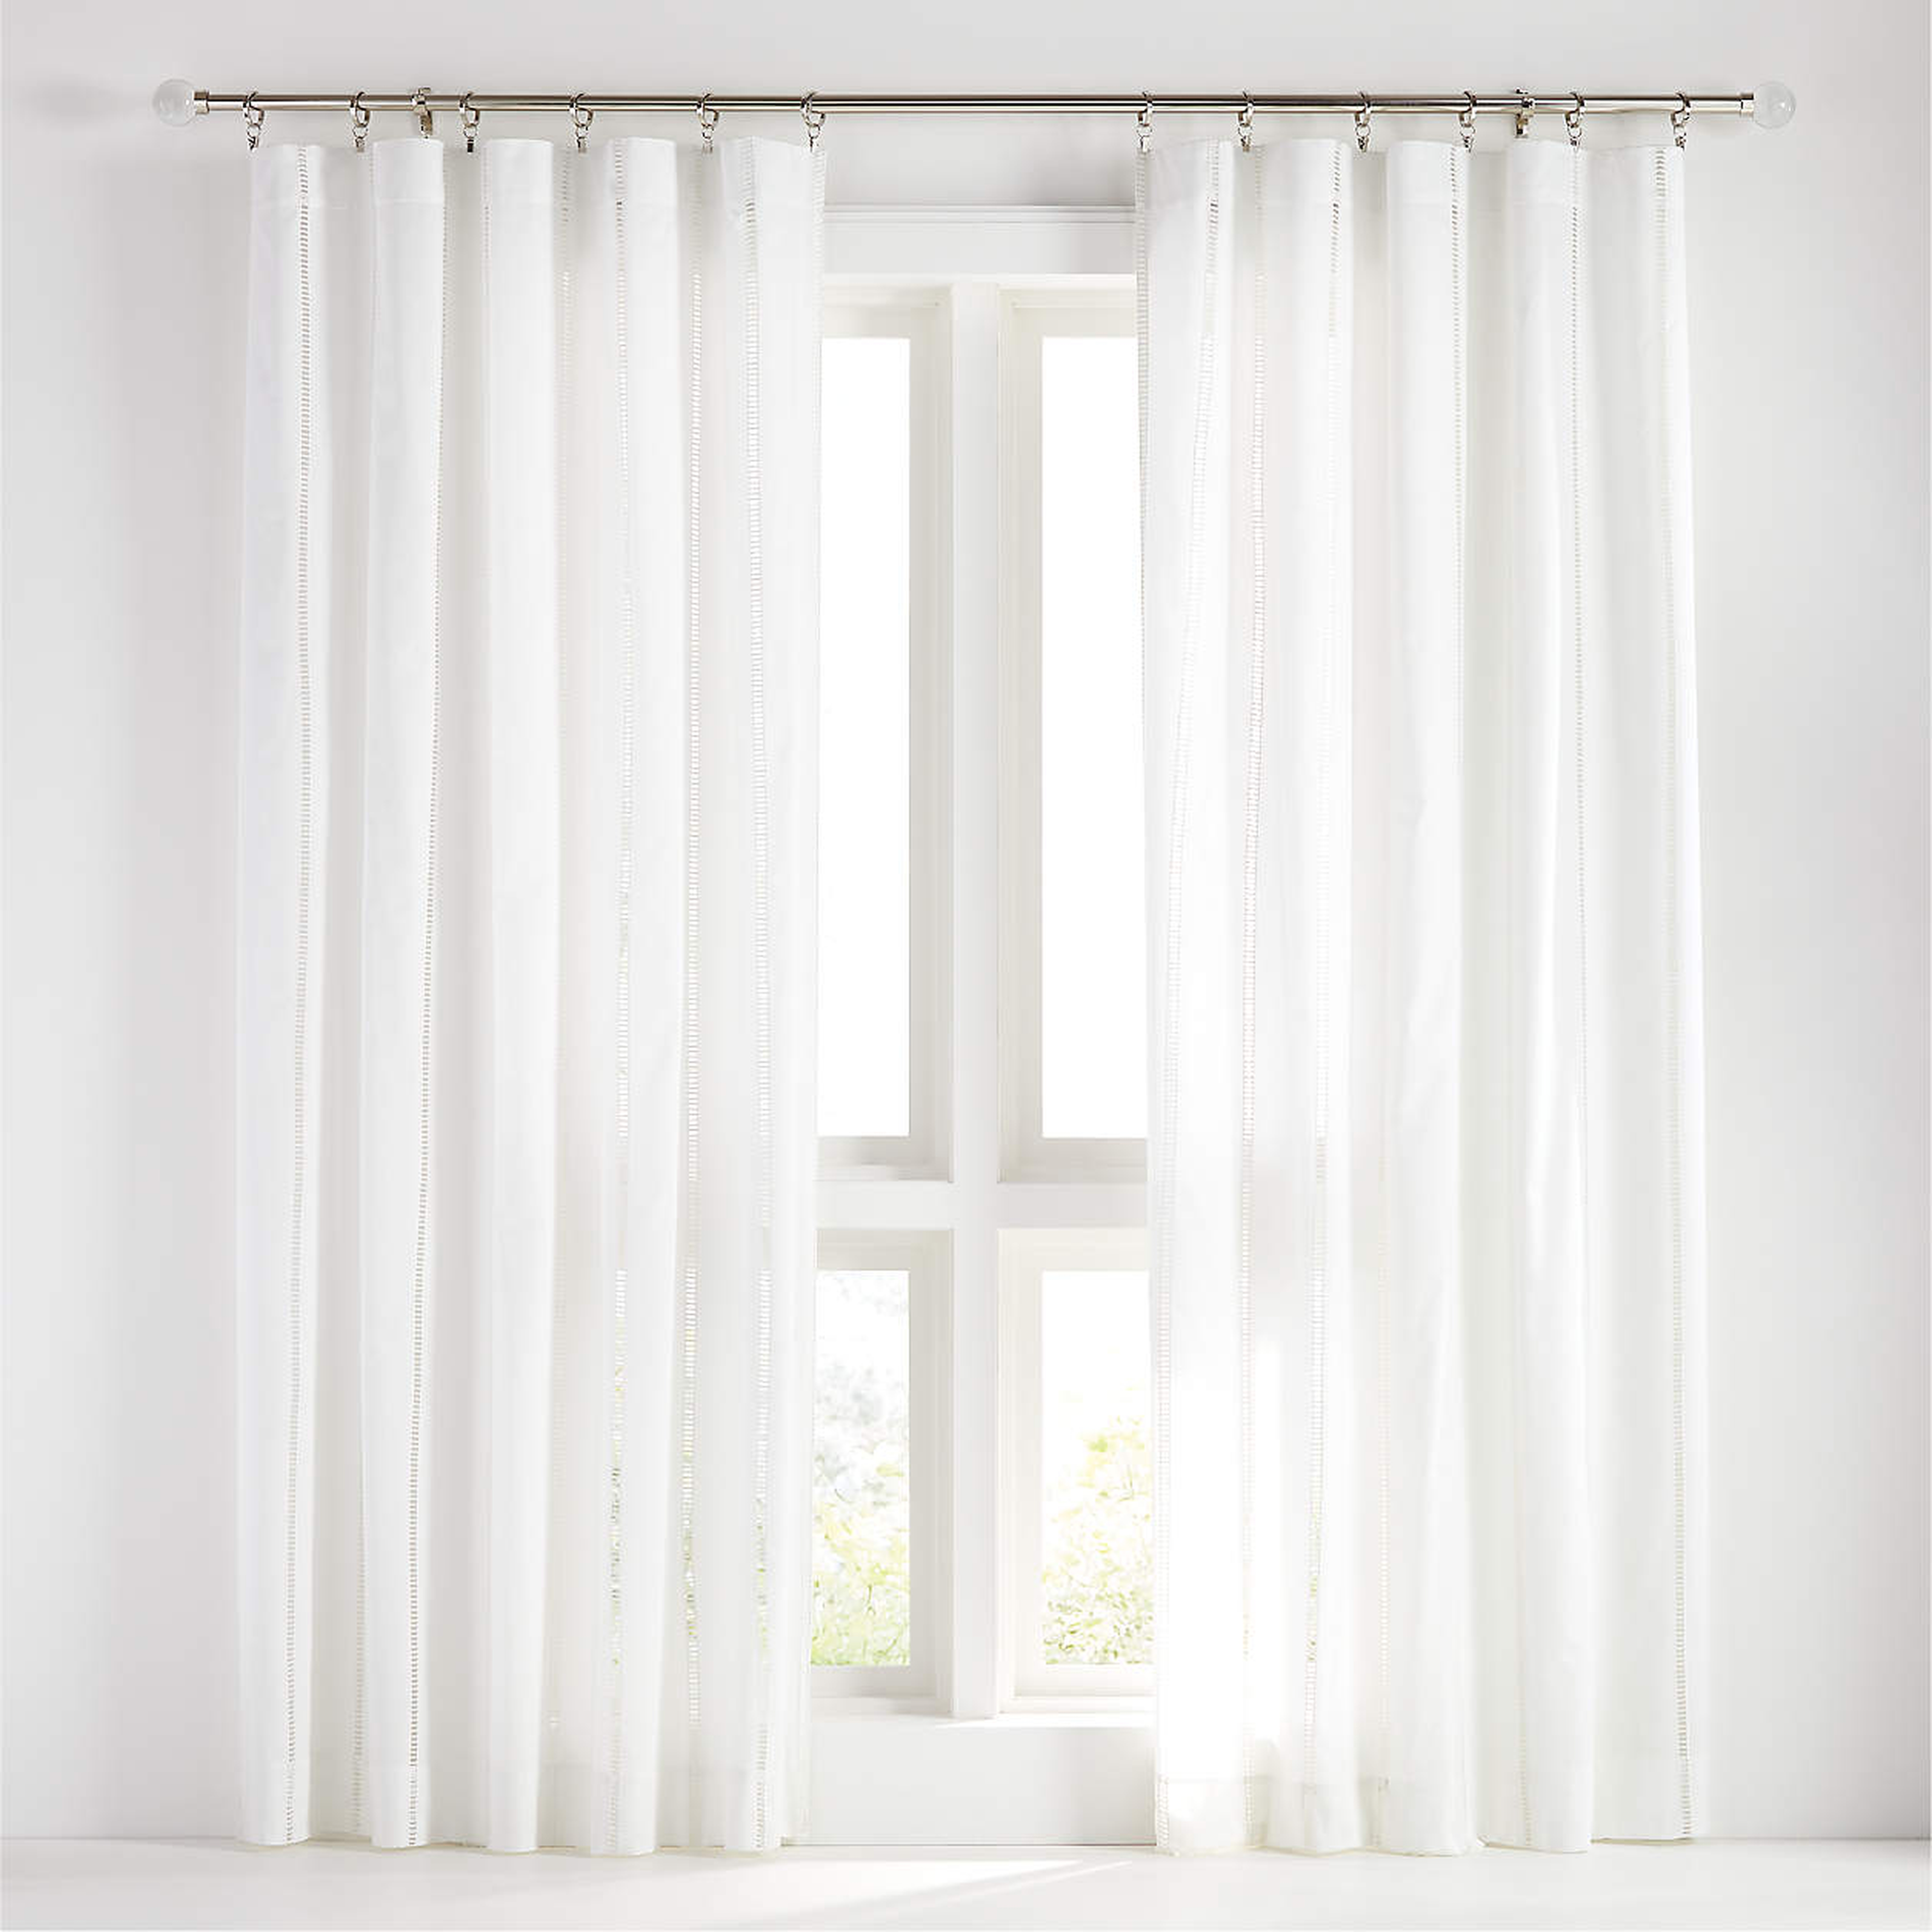 Eyelet White Curtain Panel 50"x108" - Crate and Barrel